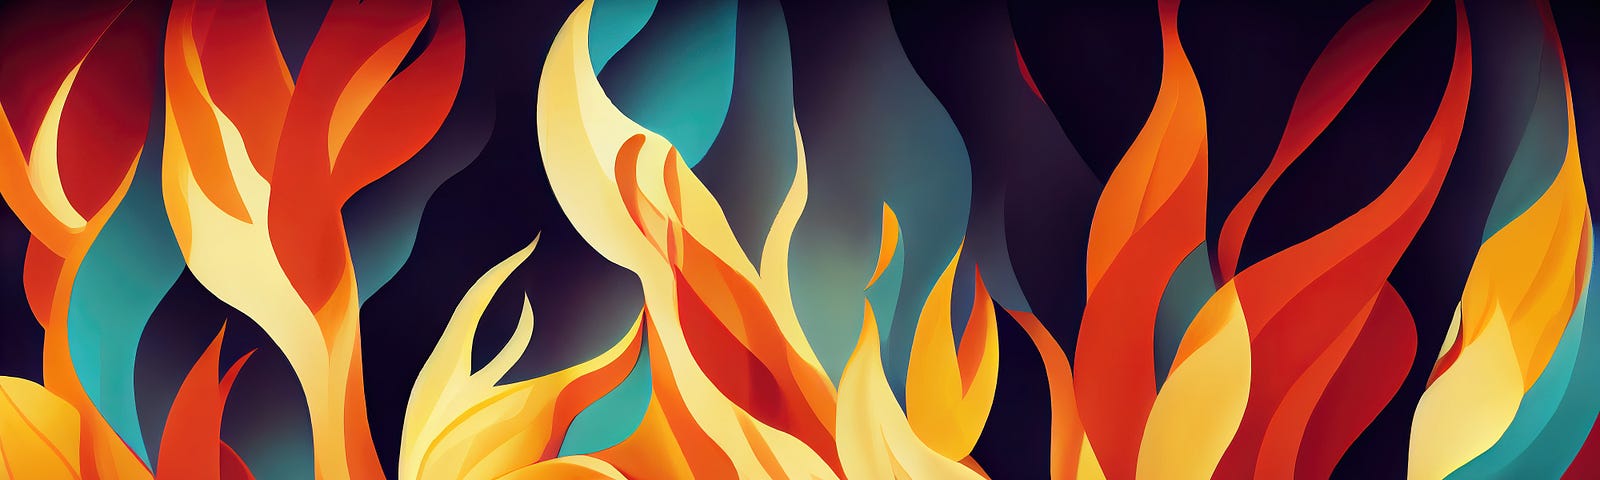 A stylized illustration of flames, licking up ominously in shades of red, yellow, and orange, against a dark blue and black cave-like background.